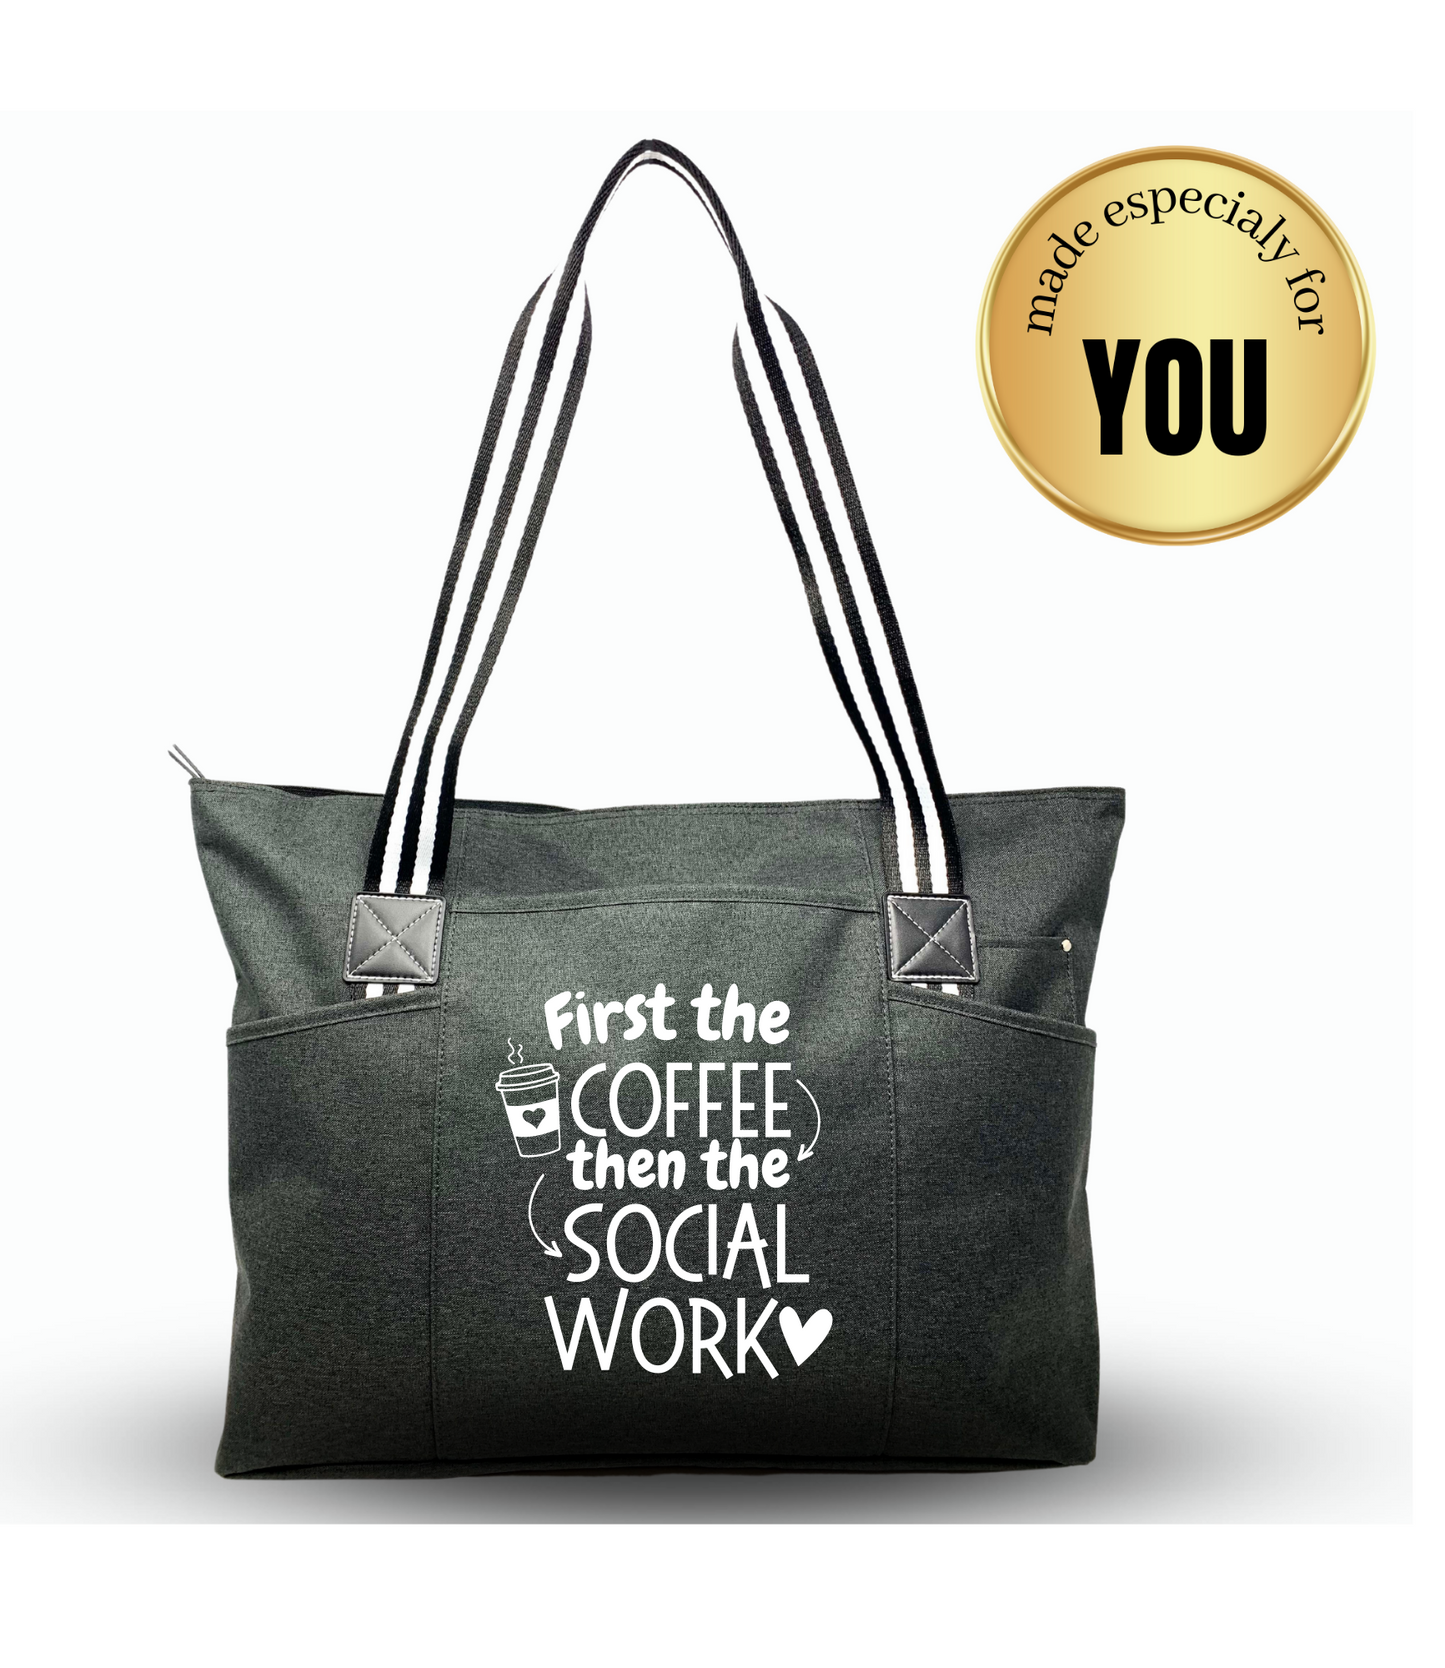 First the coffee then the social work - custom design